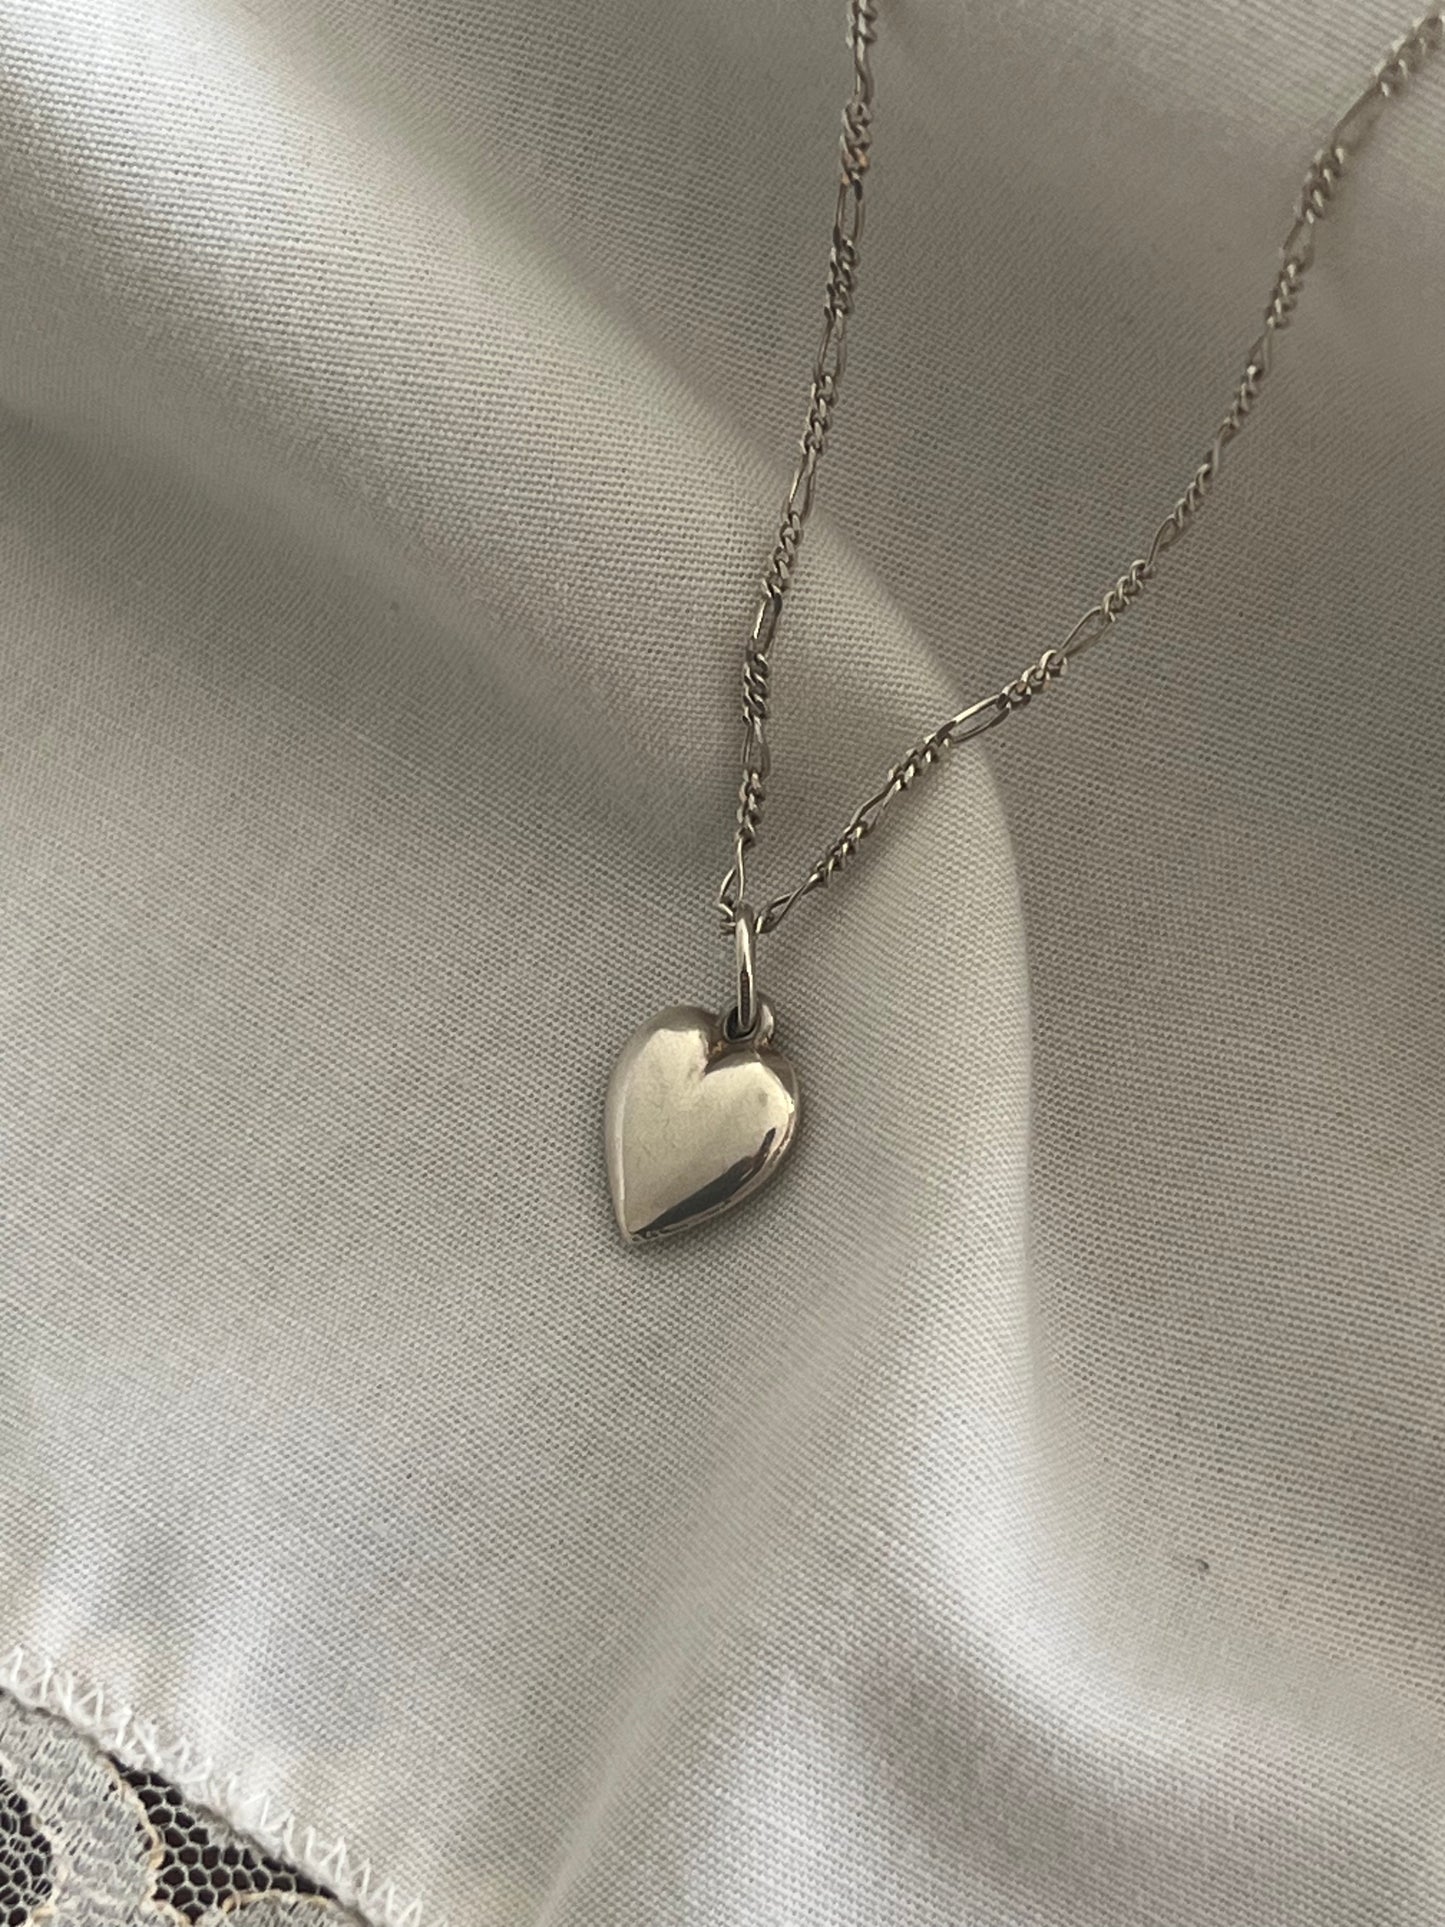 Sterling Silver Figaro Heart Charm Necklace